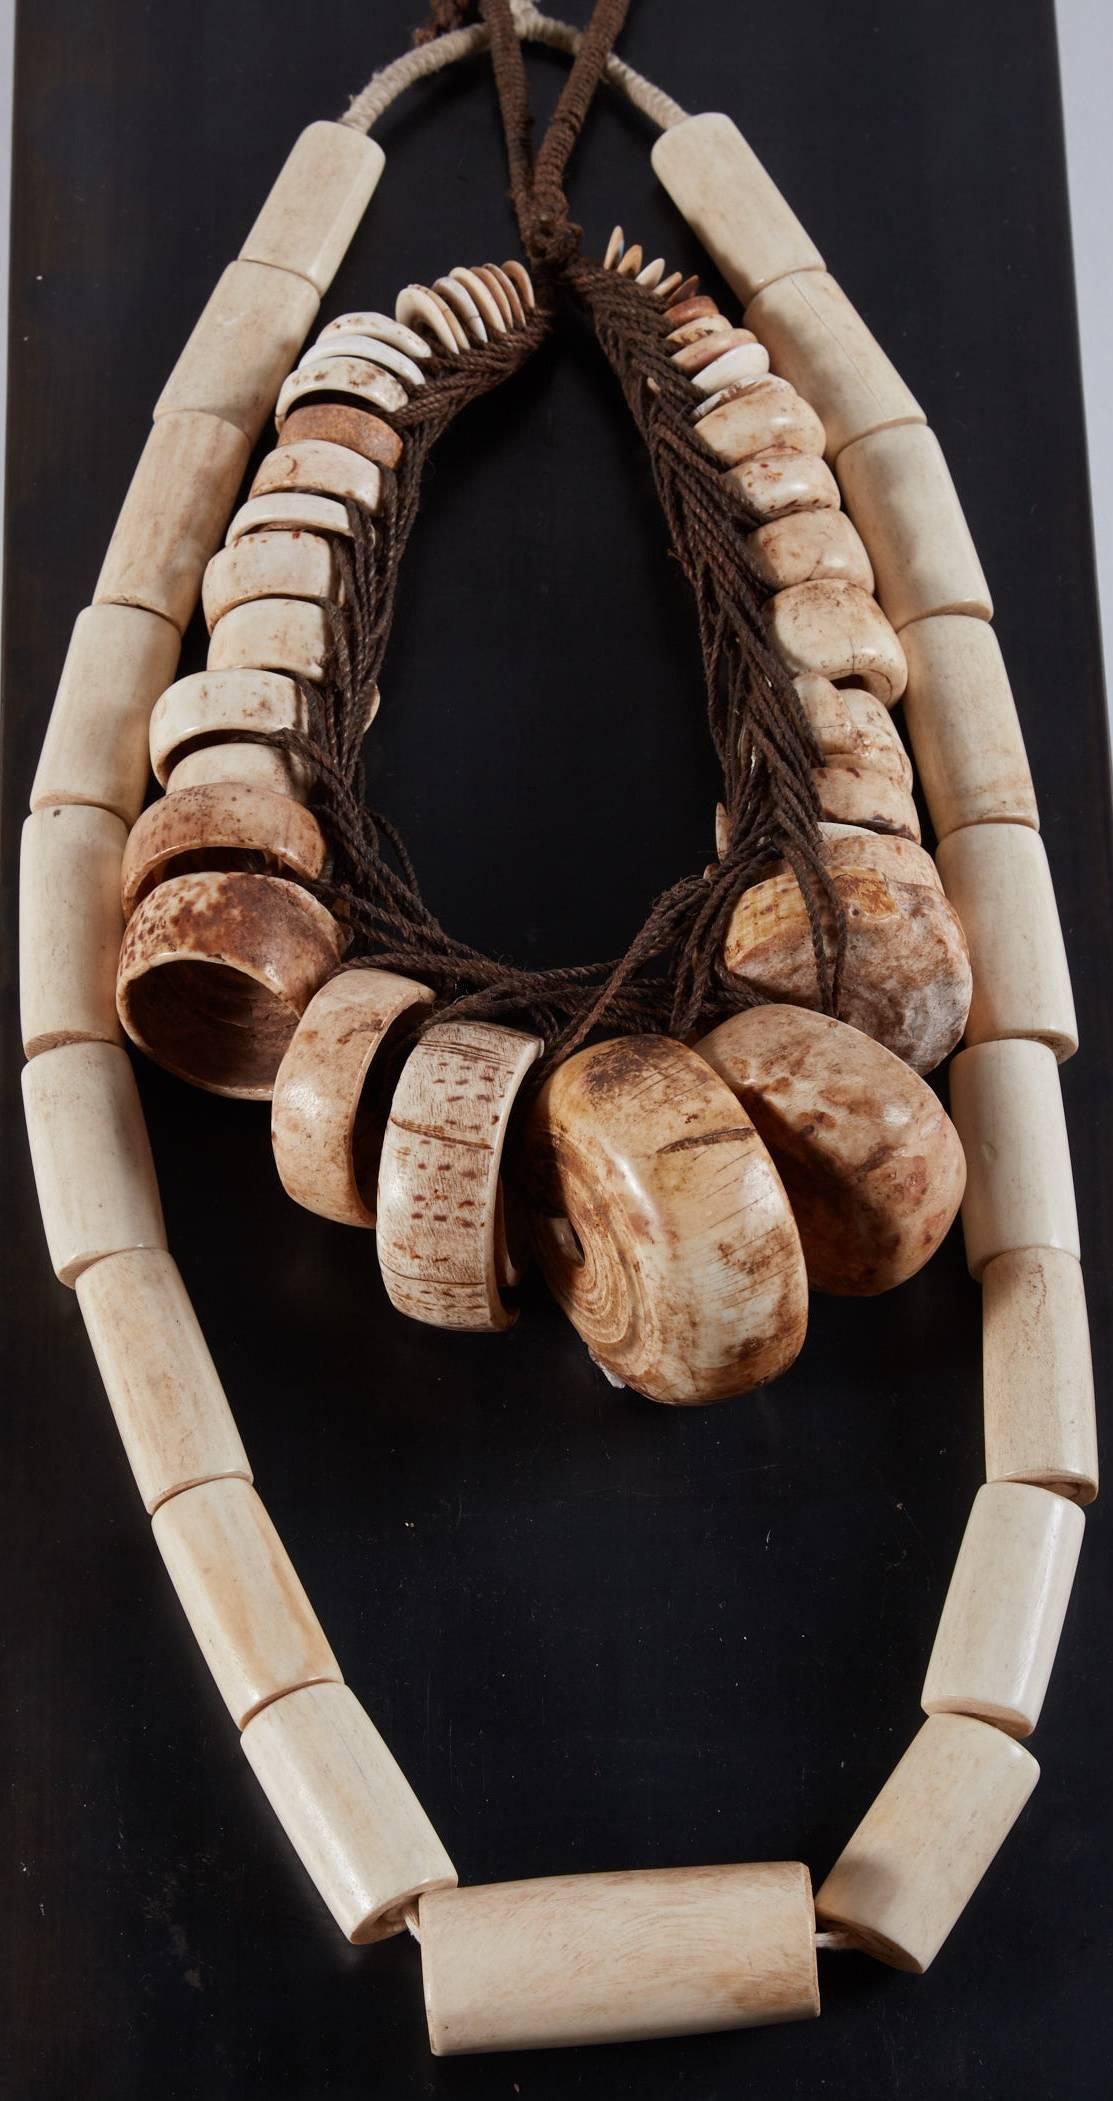 19th-20th century tribal bead objet d'Art 
20th century African bone bead strand 
19th century Thai Shell bead strand 
Displayed in steel and Lucite display case
Strands can be secured to steel and case can be adjusted to hang on the